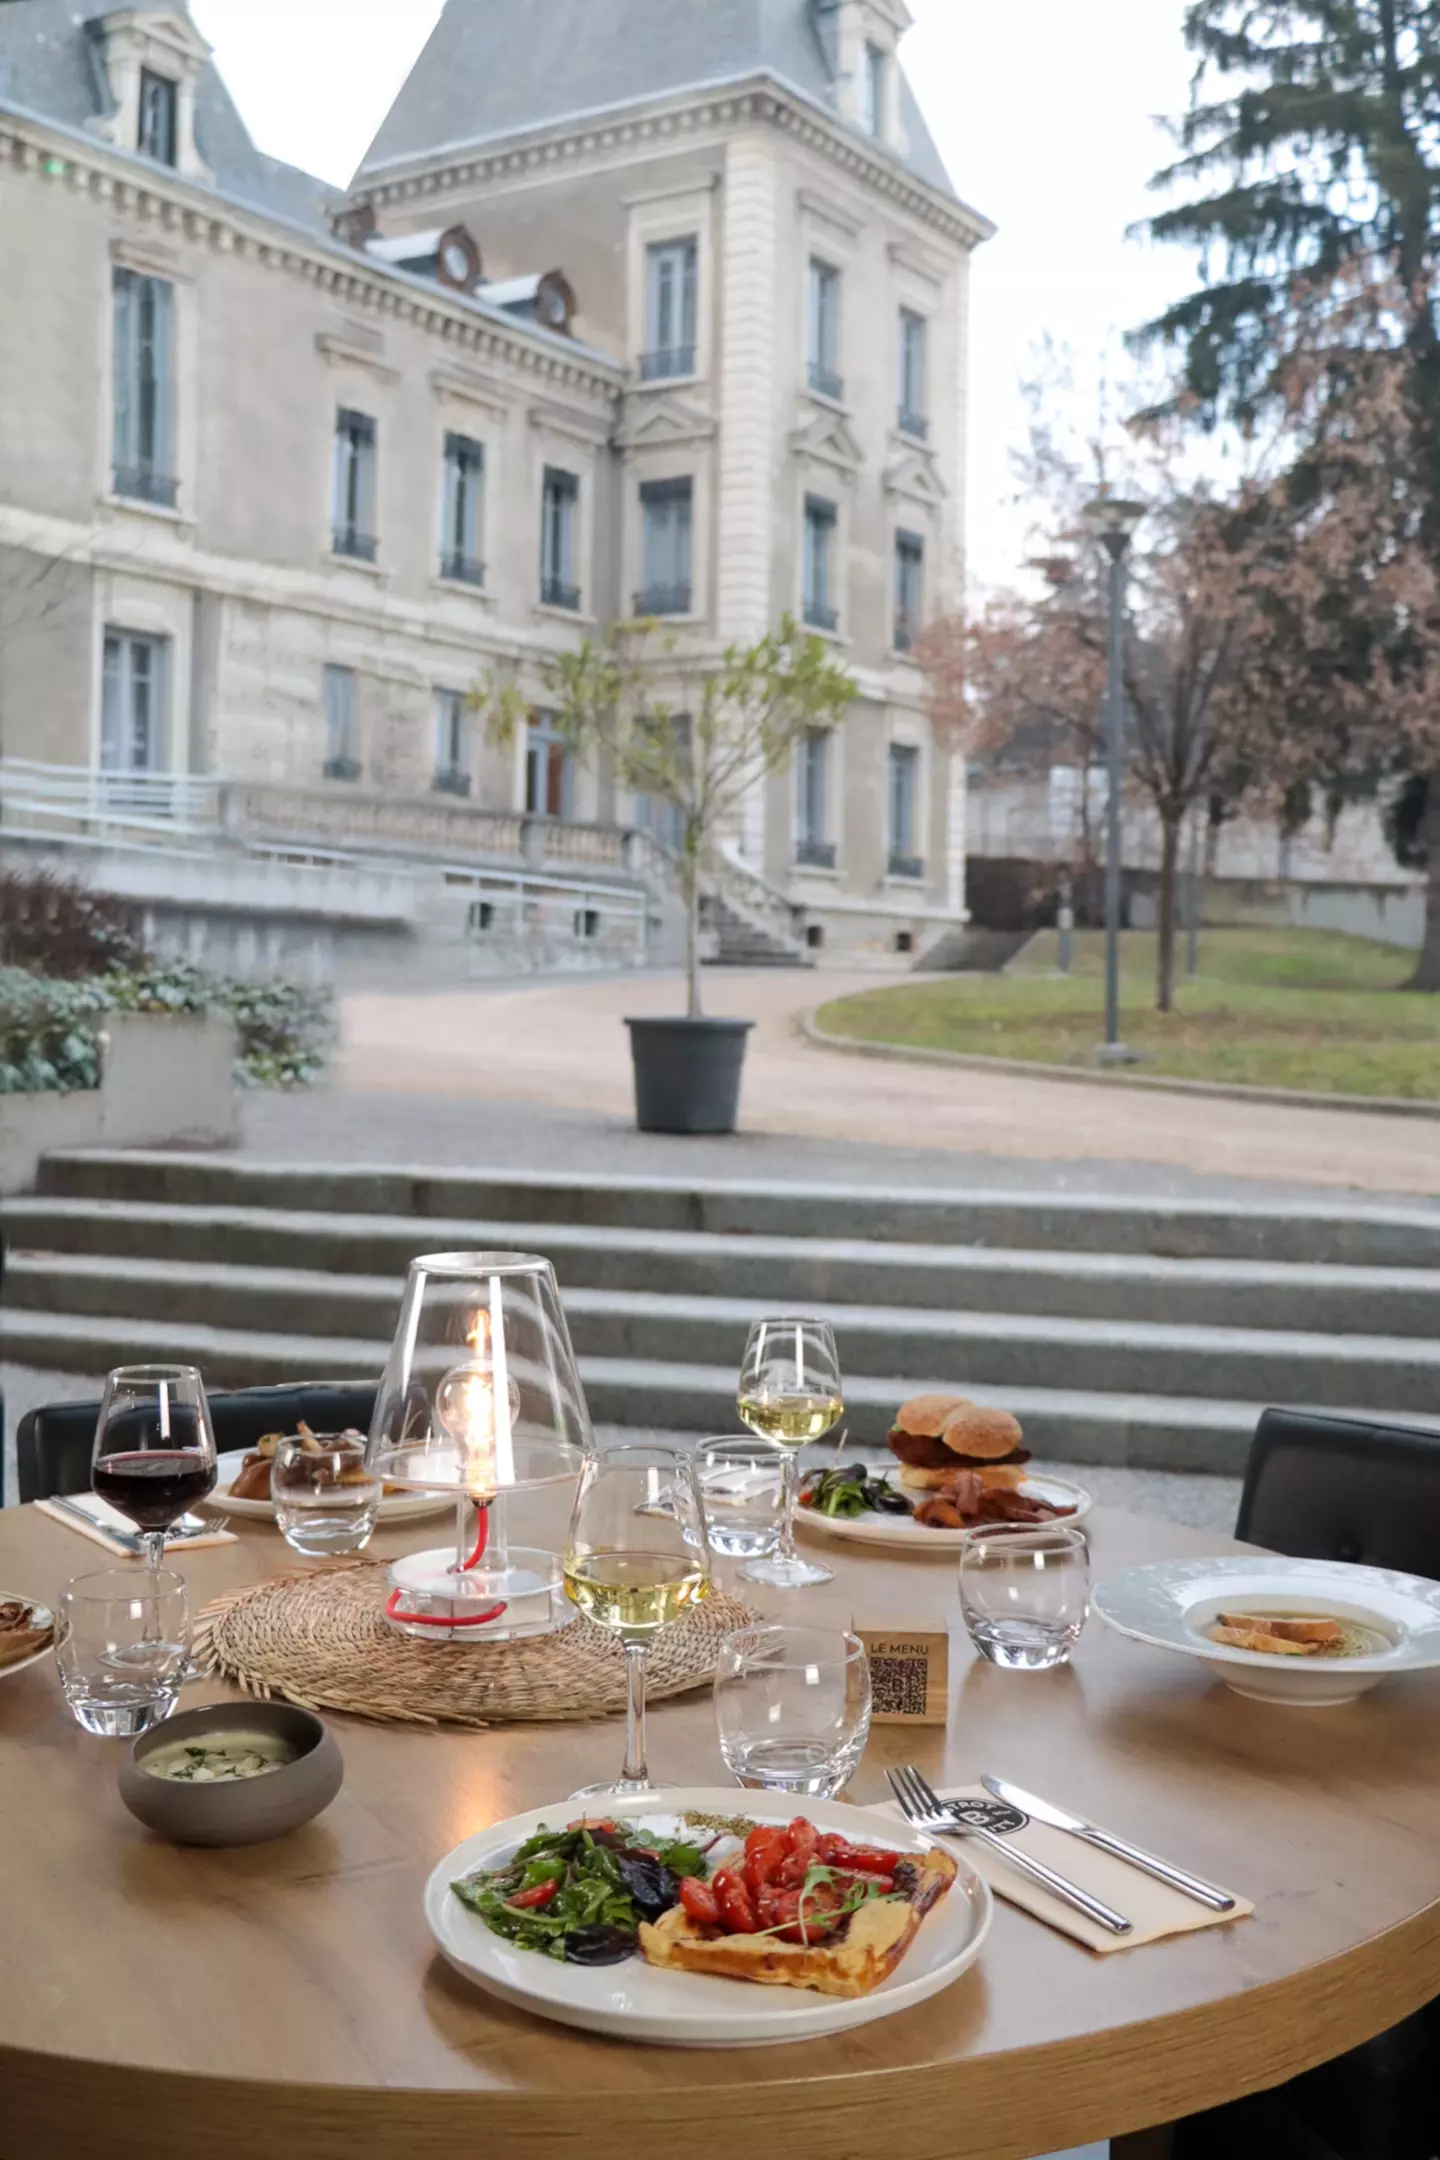 View of a terrace table at Bistrot City in Lyon Cité Internationale, set with plates of gourmet food, glasses of red and white wine, a lit lantern, overlooking a large classical building in the background.